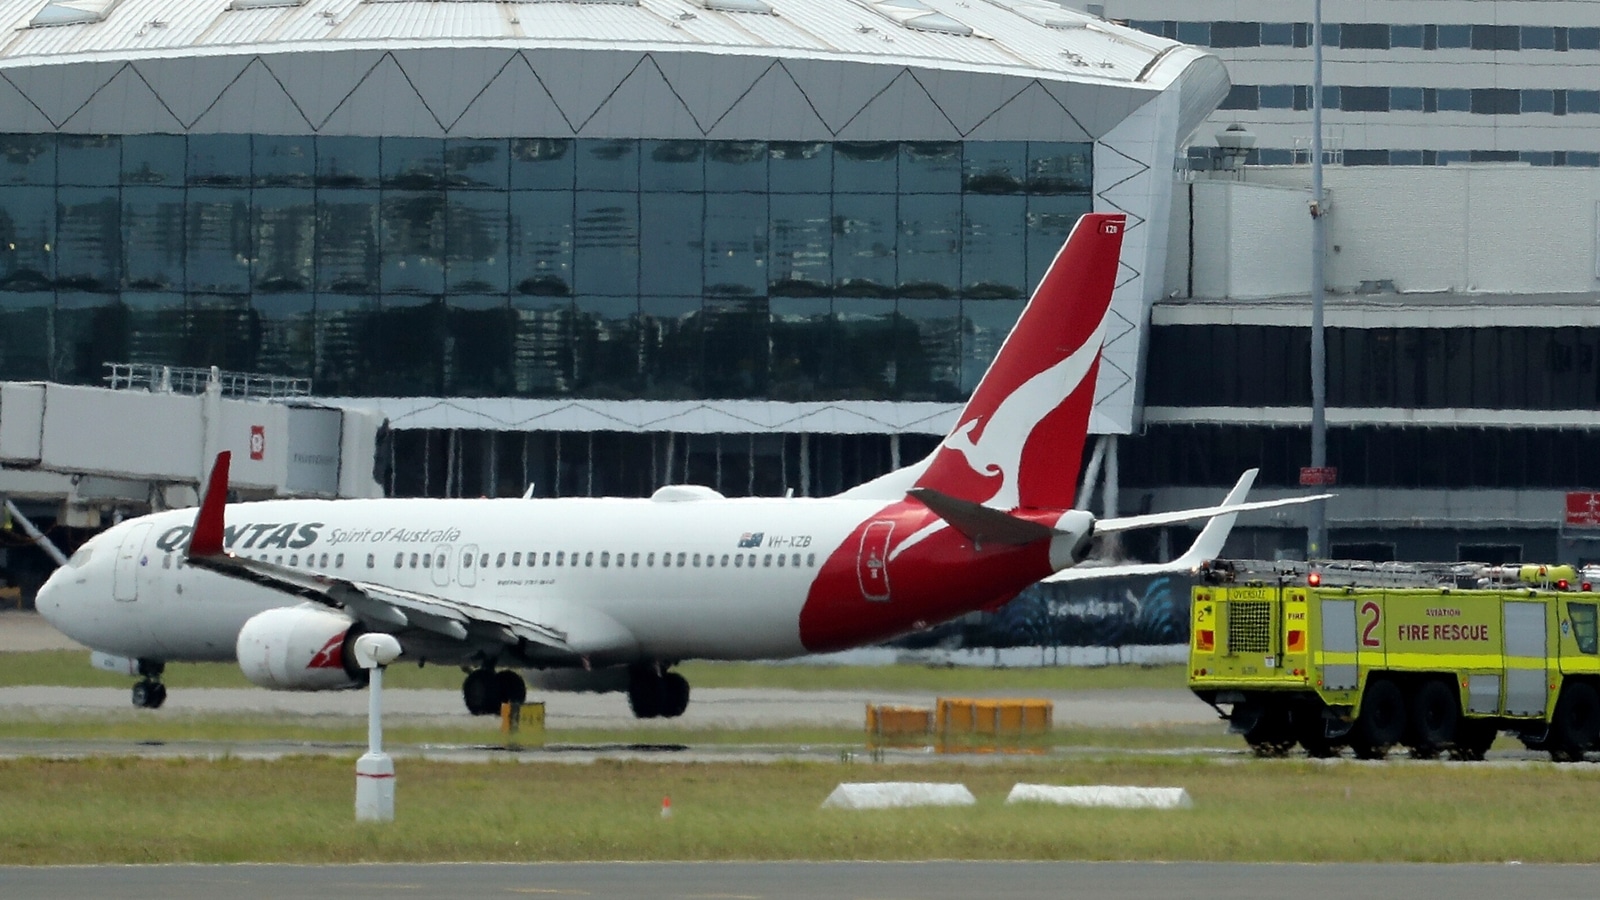 Qantas' safety reputation under spotlight after spate of technical issues